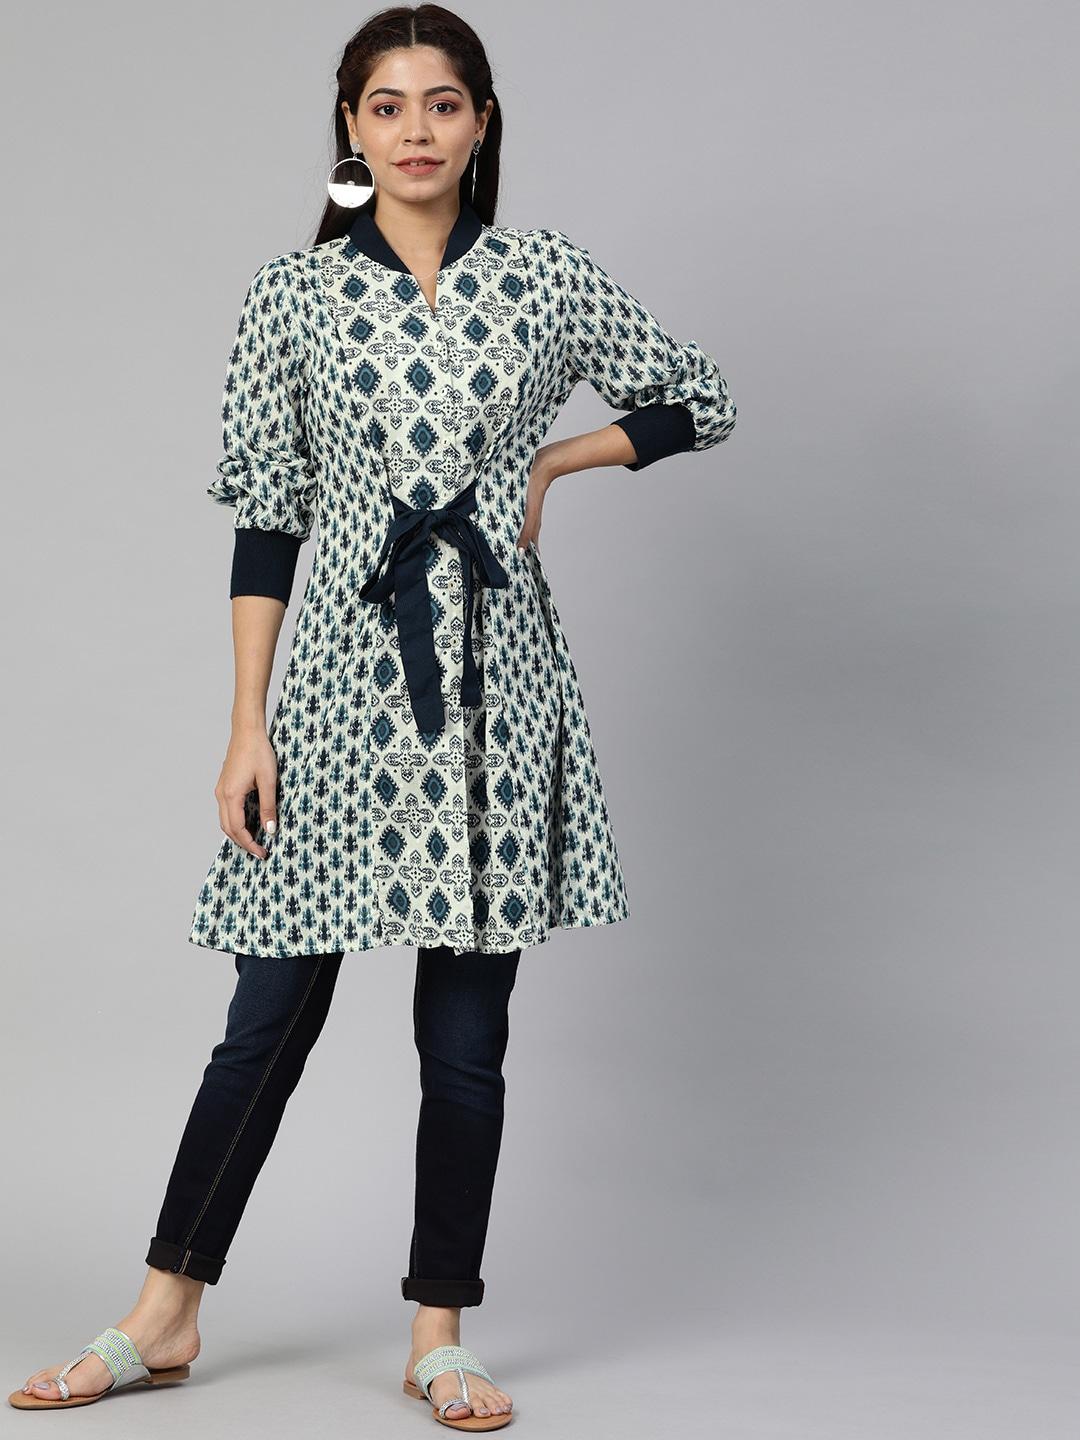 Global Desi Women's White & Blue Printed Panelled Tunic with Waist Tie-Ups